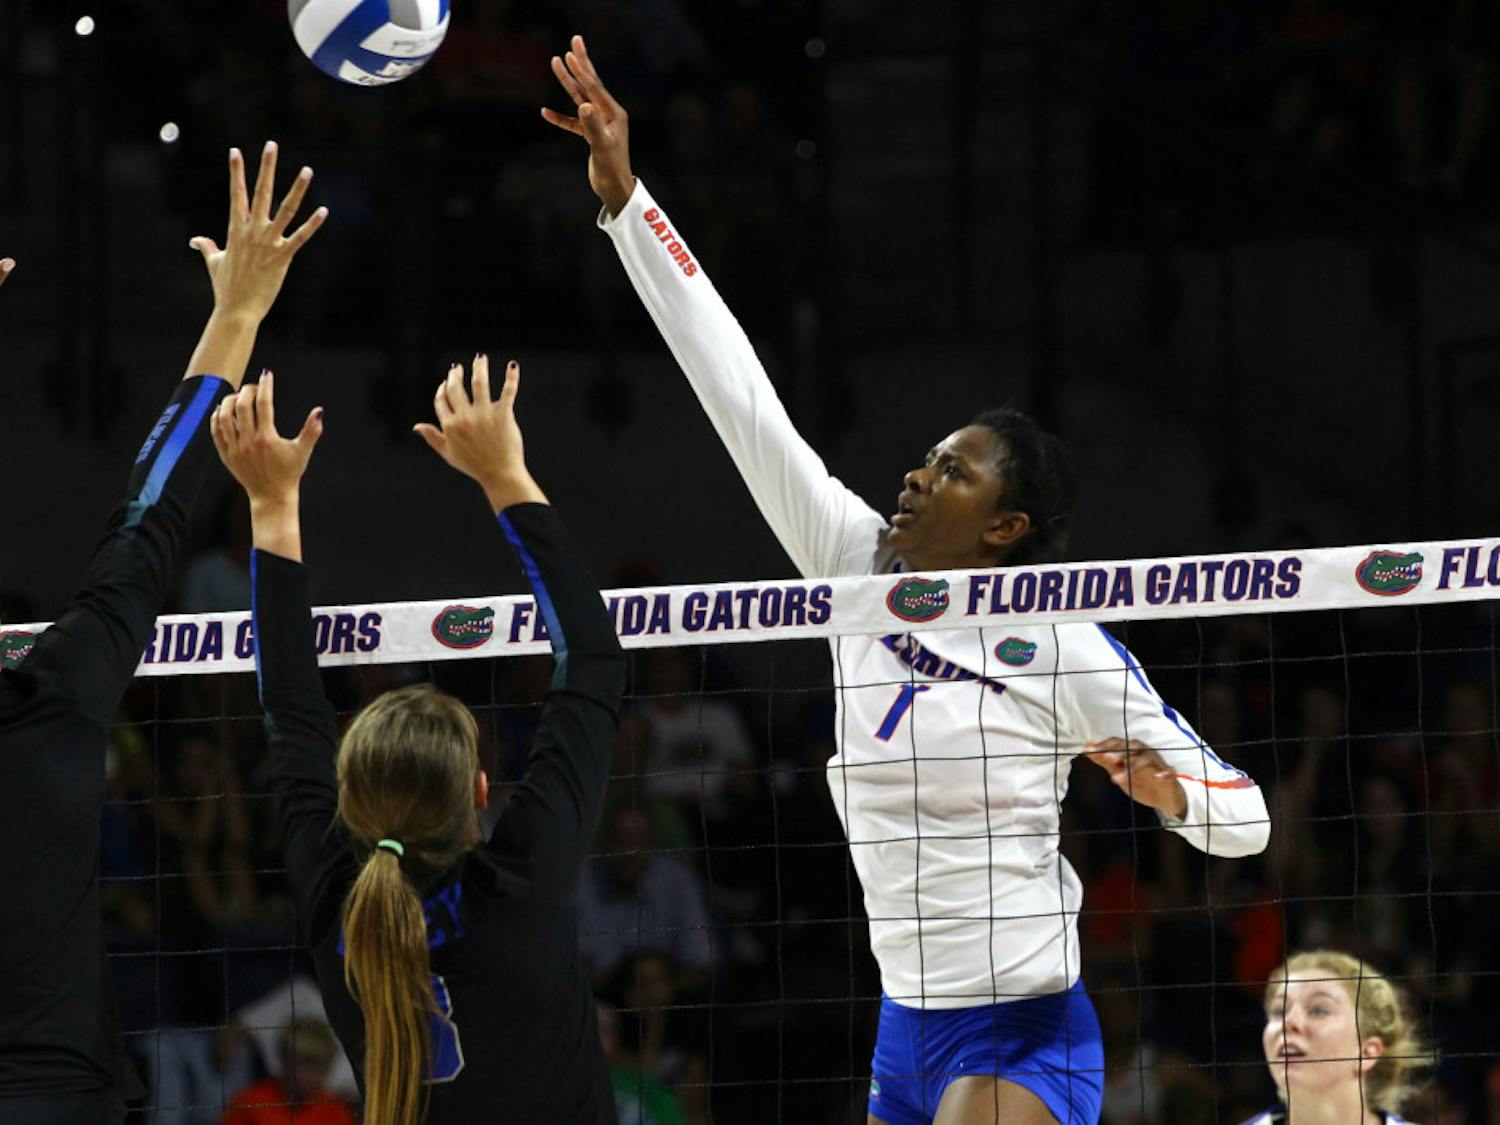 Rhamat Alhassan finished Sunday's match against Tennessee with a total of six blocks, enough to set the Florida record for career blocks.